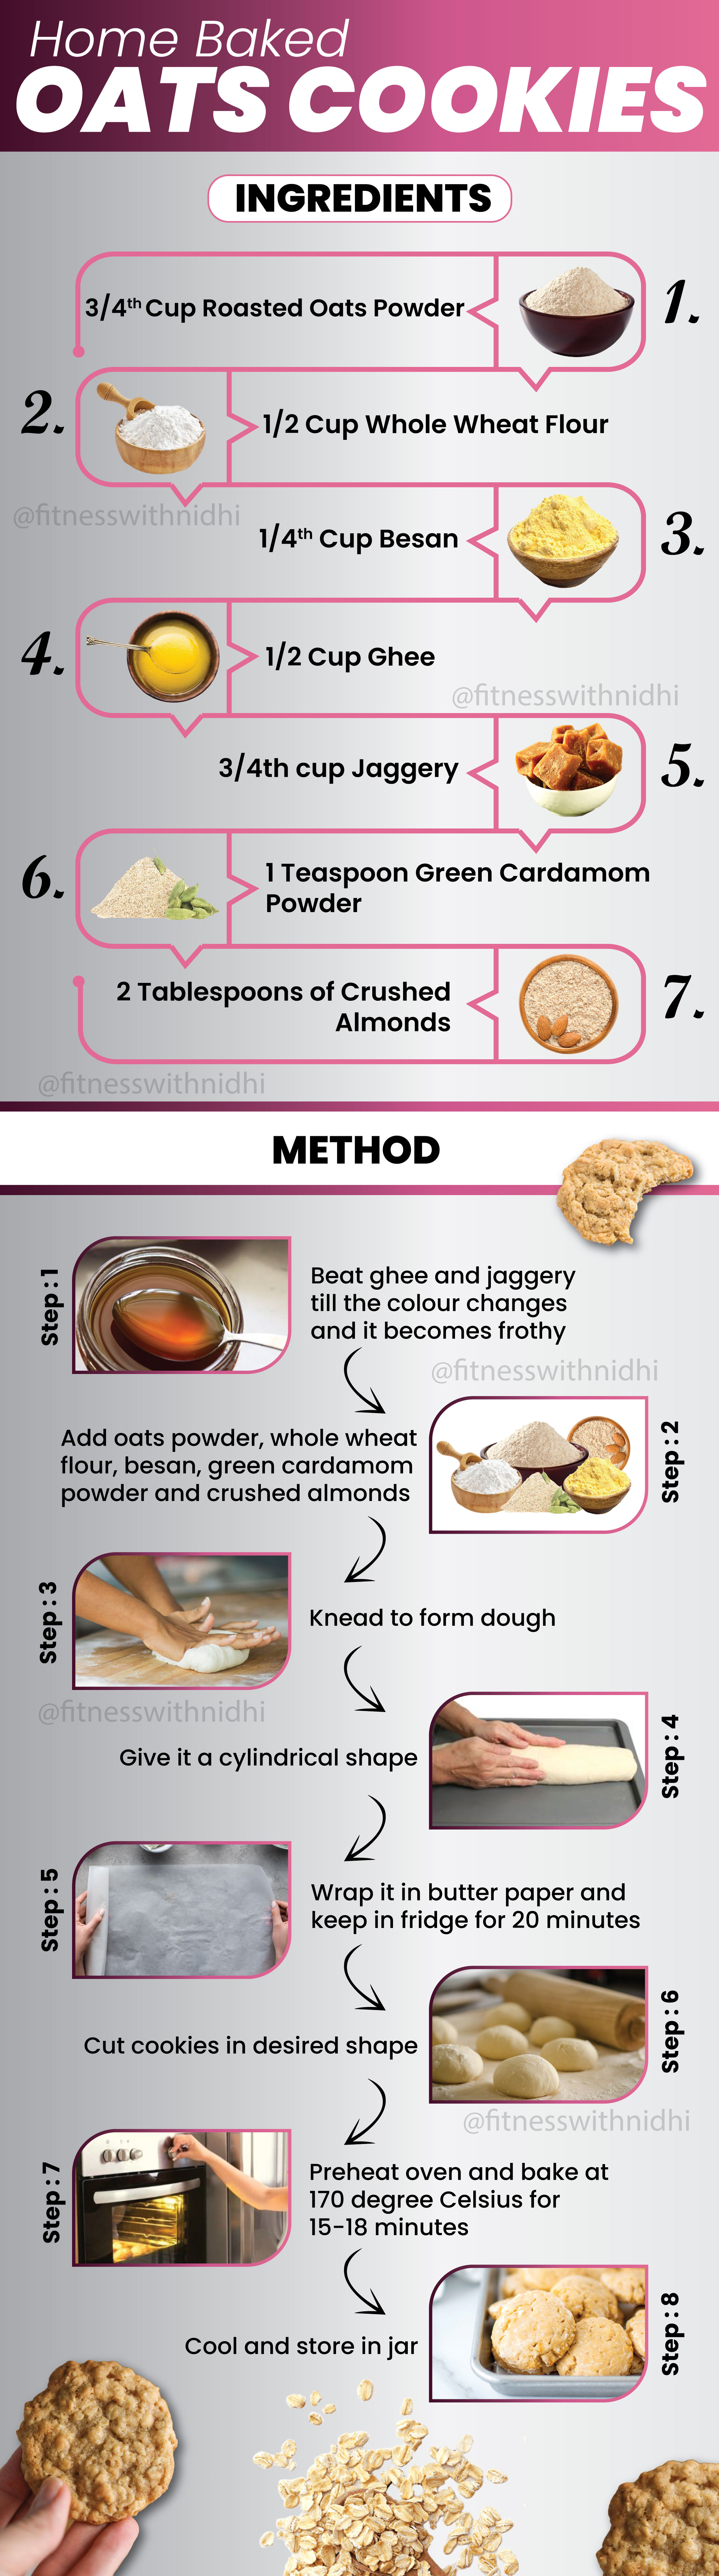 how to make home baked oats cookies